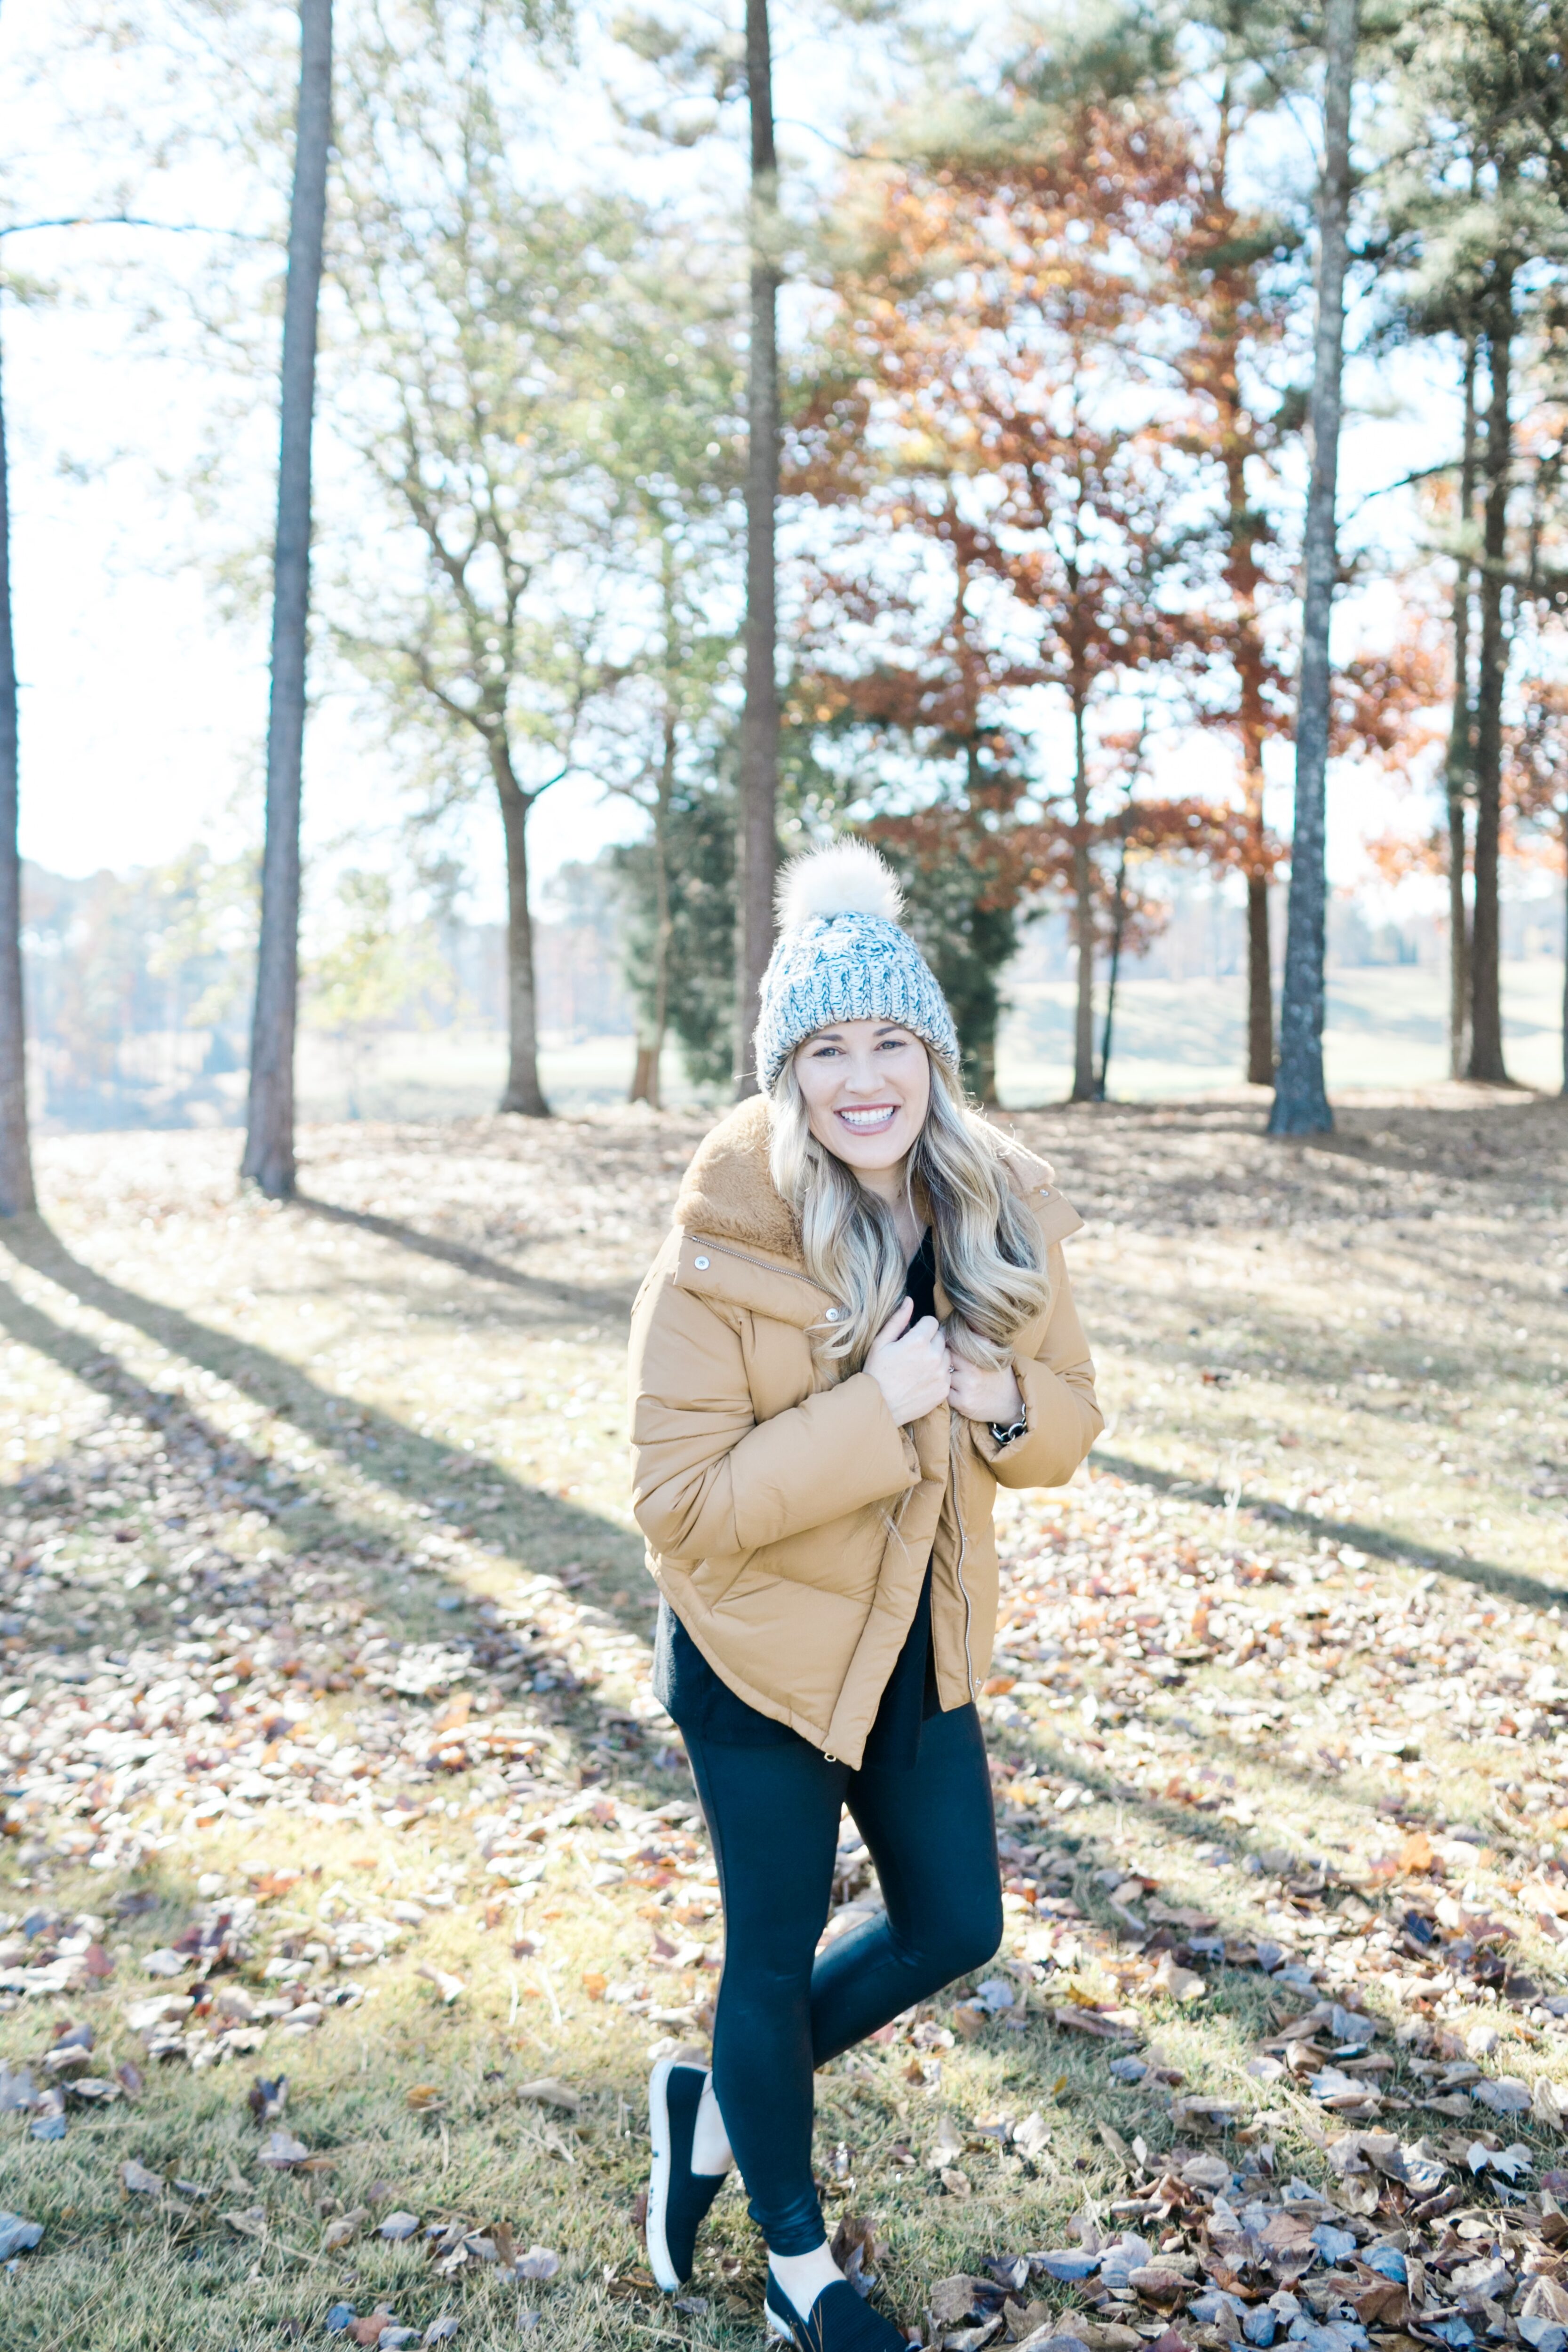 20 Affordable Puffer Coats for Her Under $100 featured by top US mom fashion blogger, Walking in Memphis in High Heels.